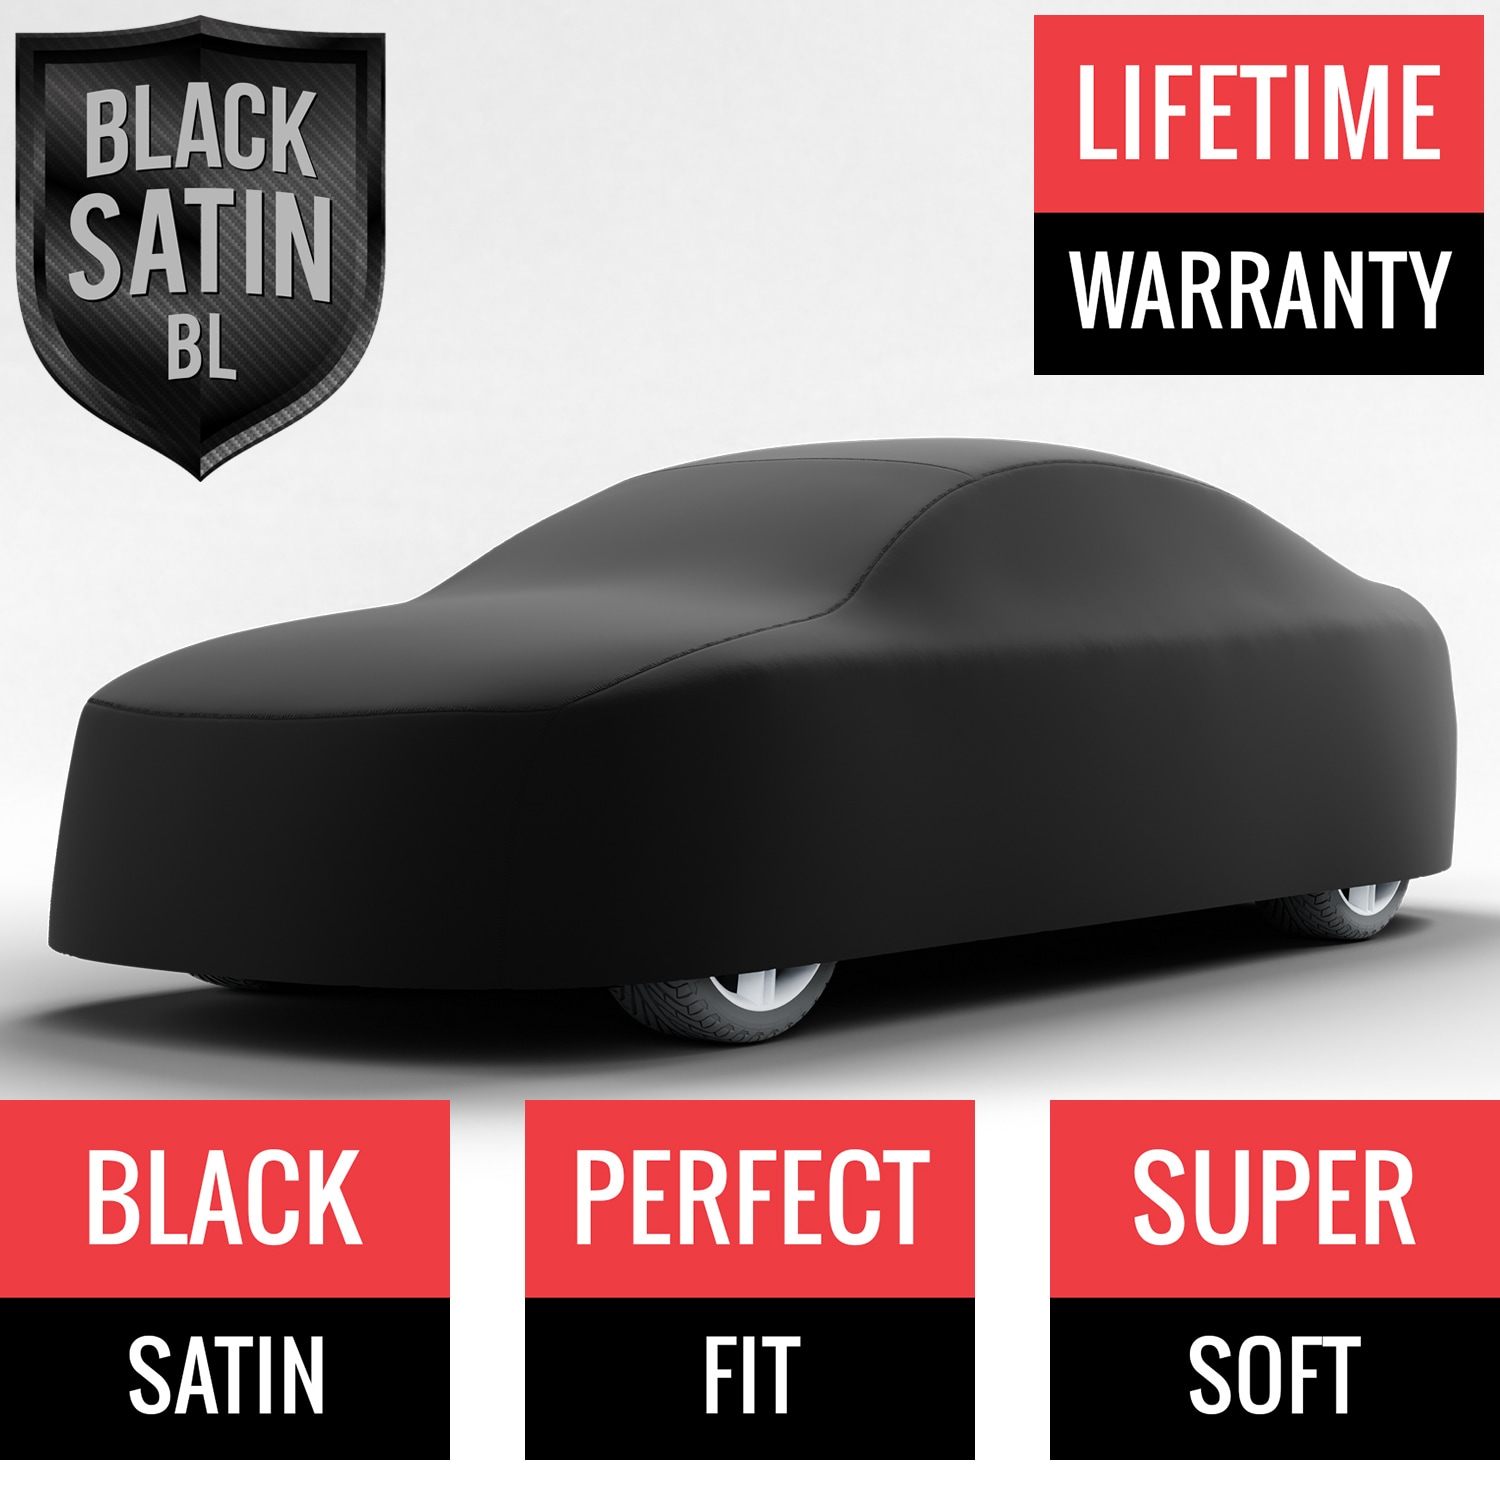 Black Satin BL - Black Car Cover for Ford Mustang 1972 Convertible 2-Door